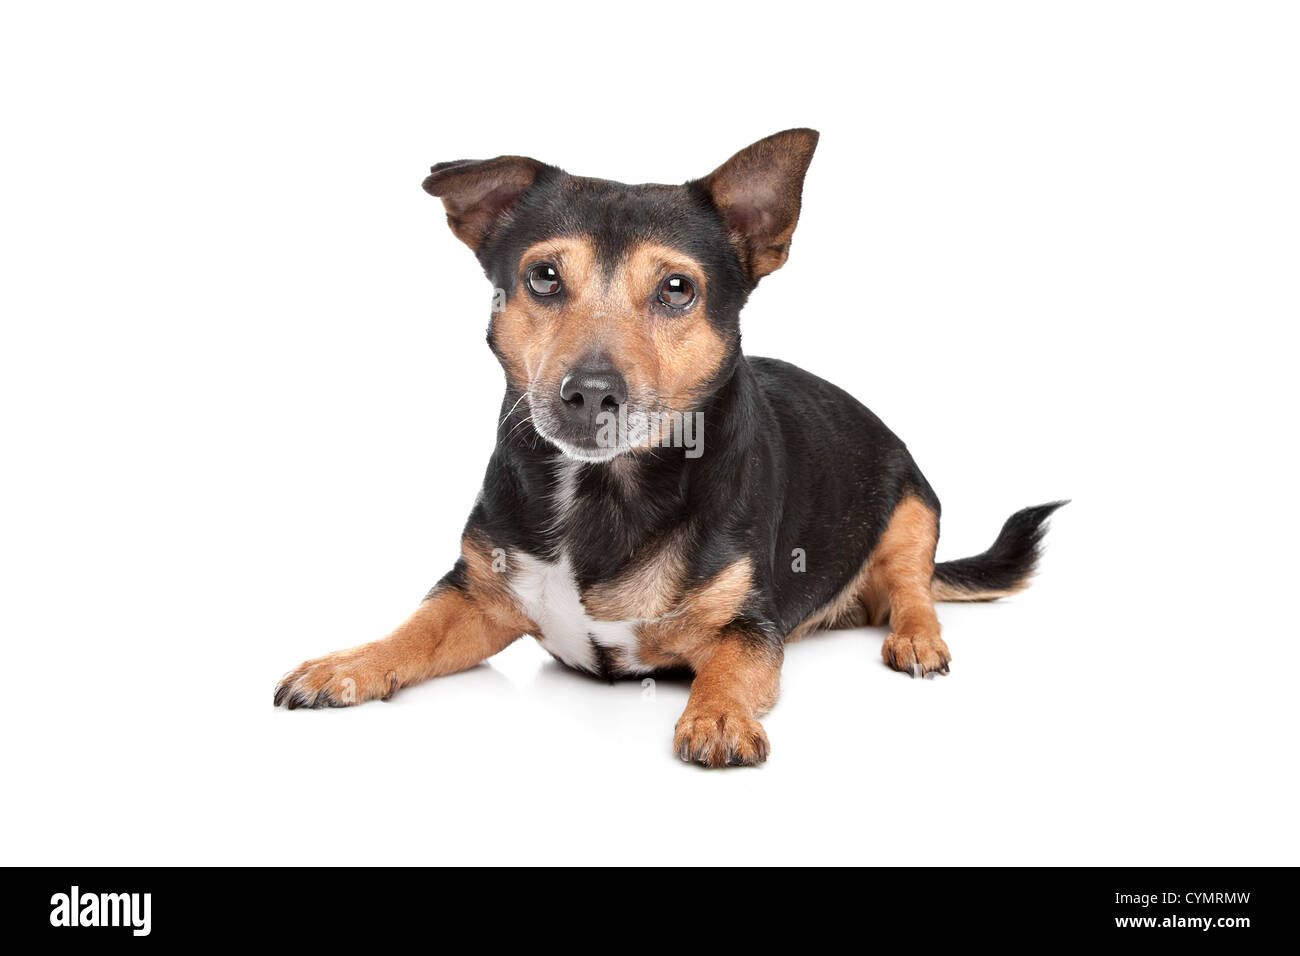 Black and Tan Jack Russel Terrier in front of white background Stock Photo